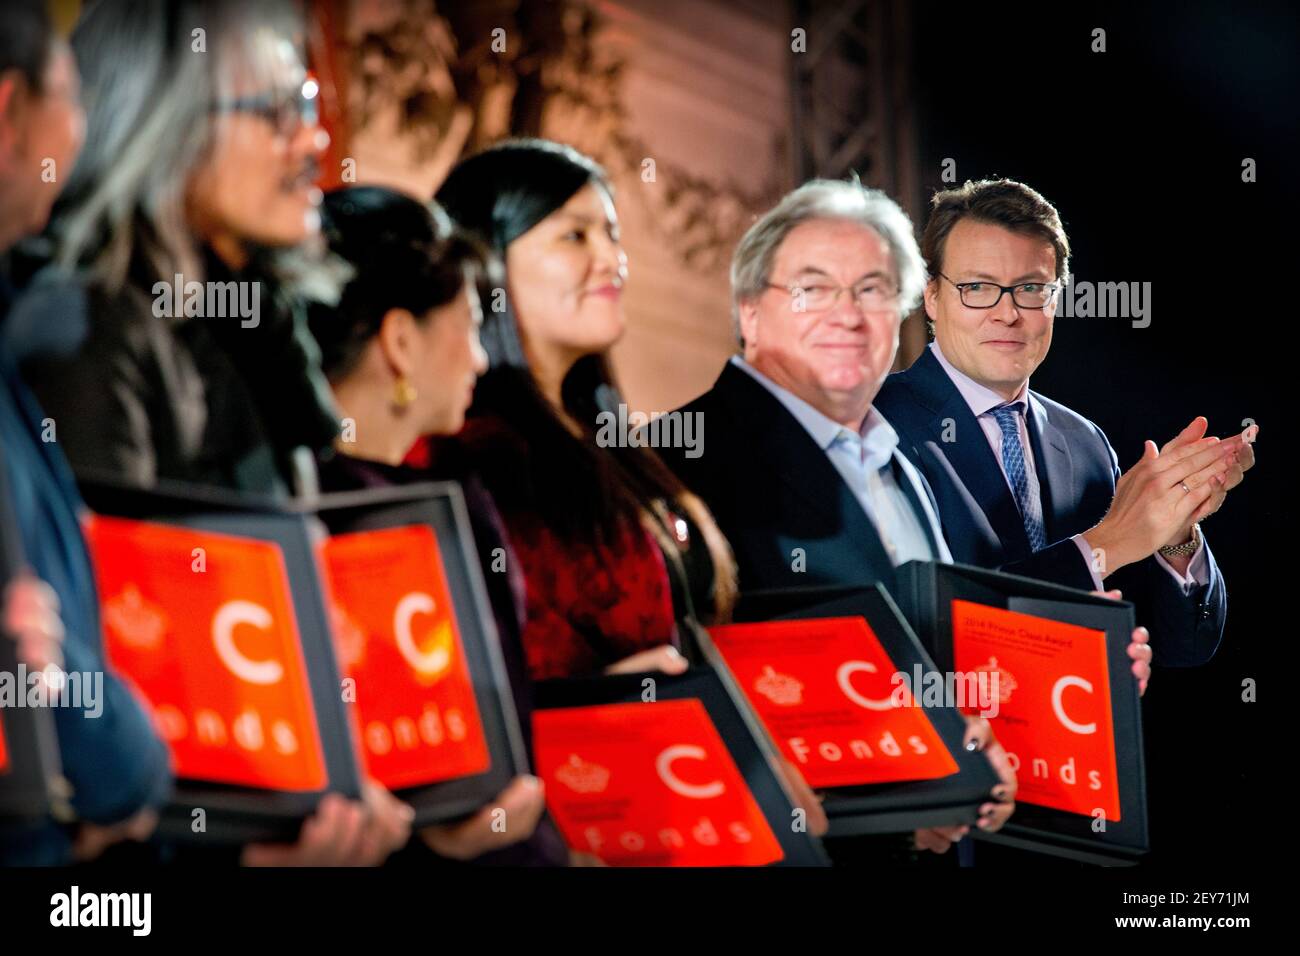 10-12-2014 AMSTERDAM - Prince Constantijn attends the award ceremony of the Prince Claus Prize 2014 to Columbian artist and plant expert Abel RodrÃguez at the Royal Palace in Amsterdam (Photo by Robin Utrecht/Sipa USA) Stock Photo